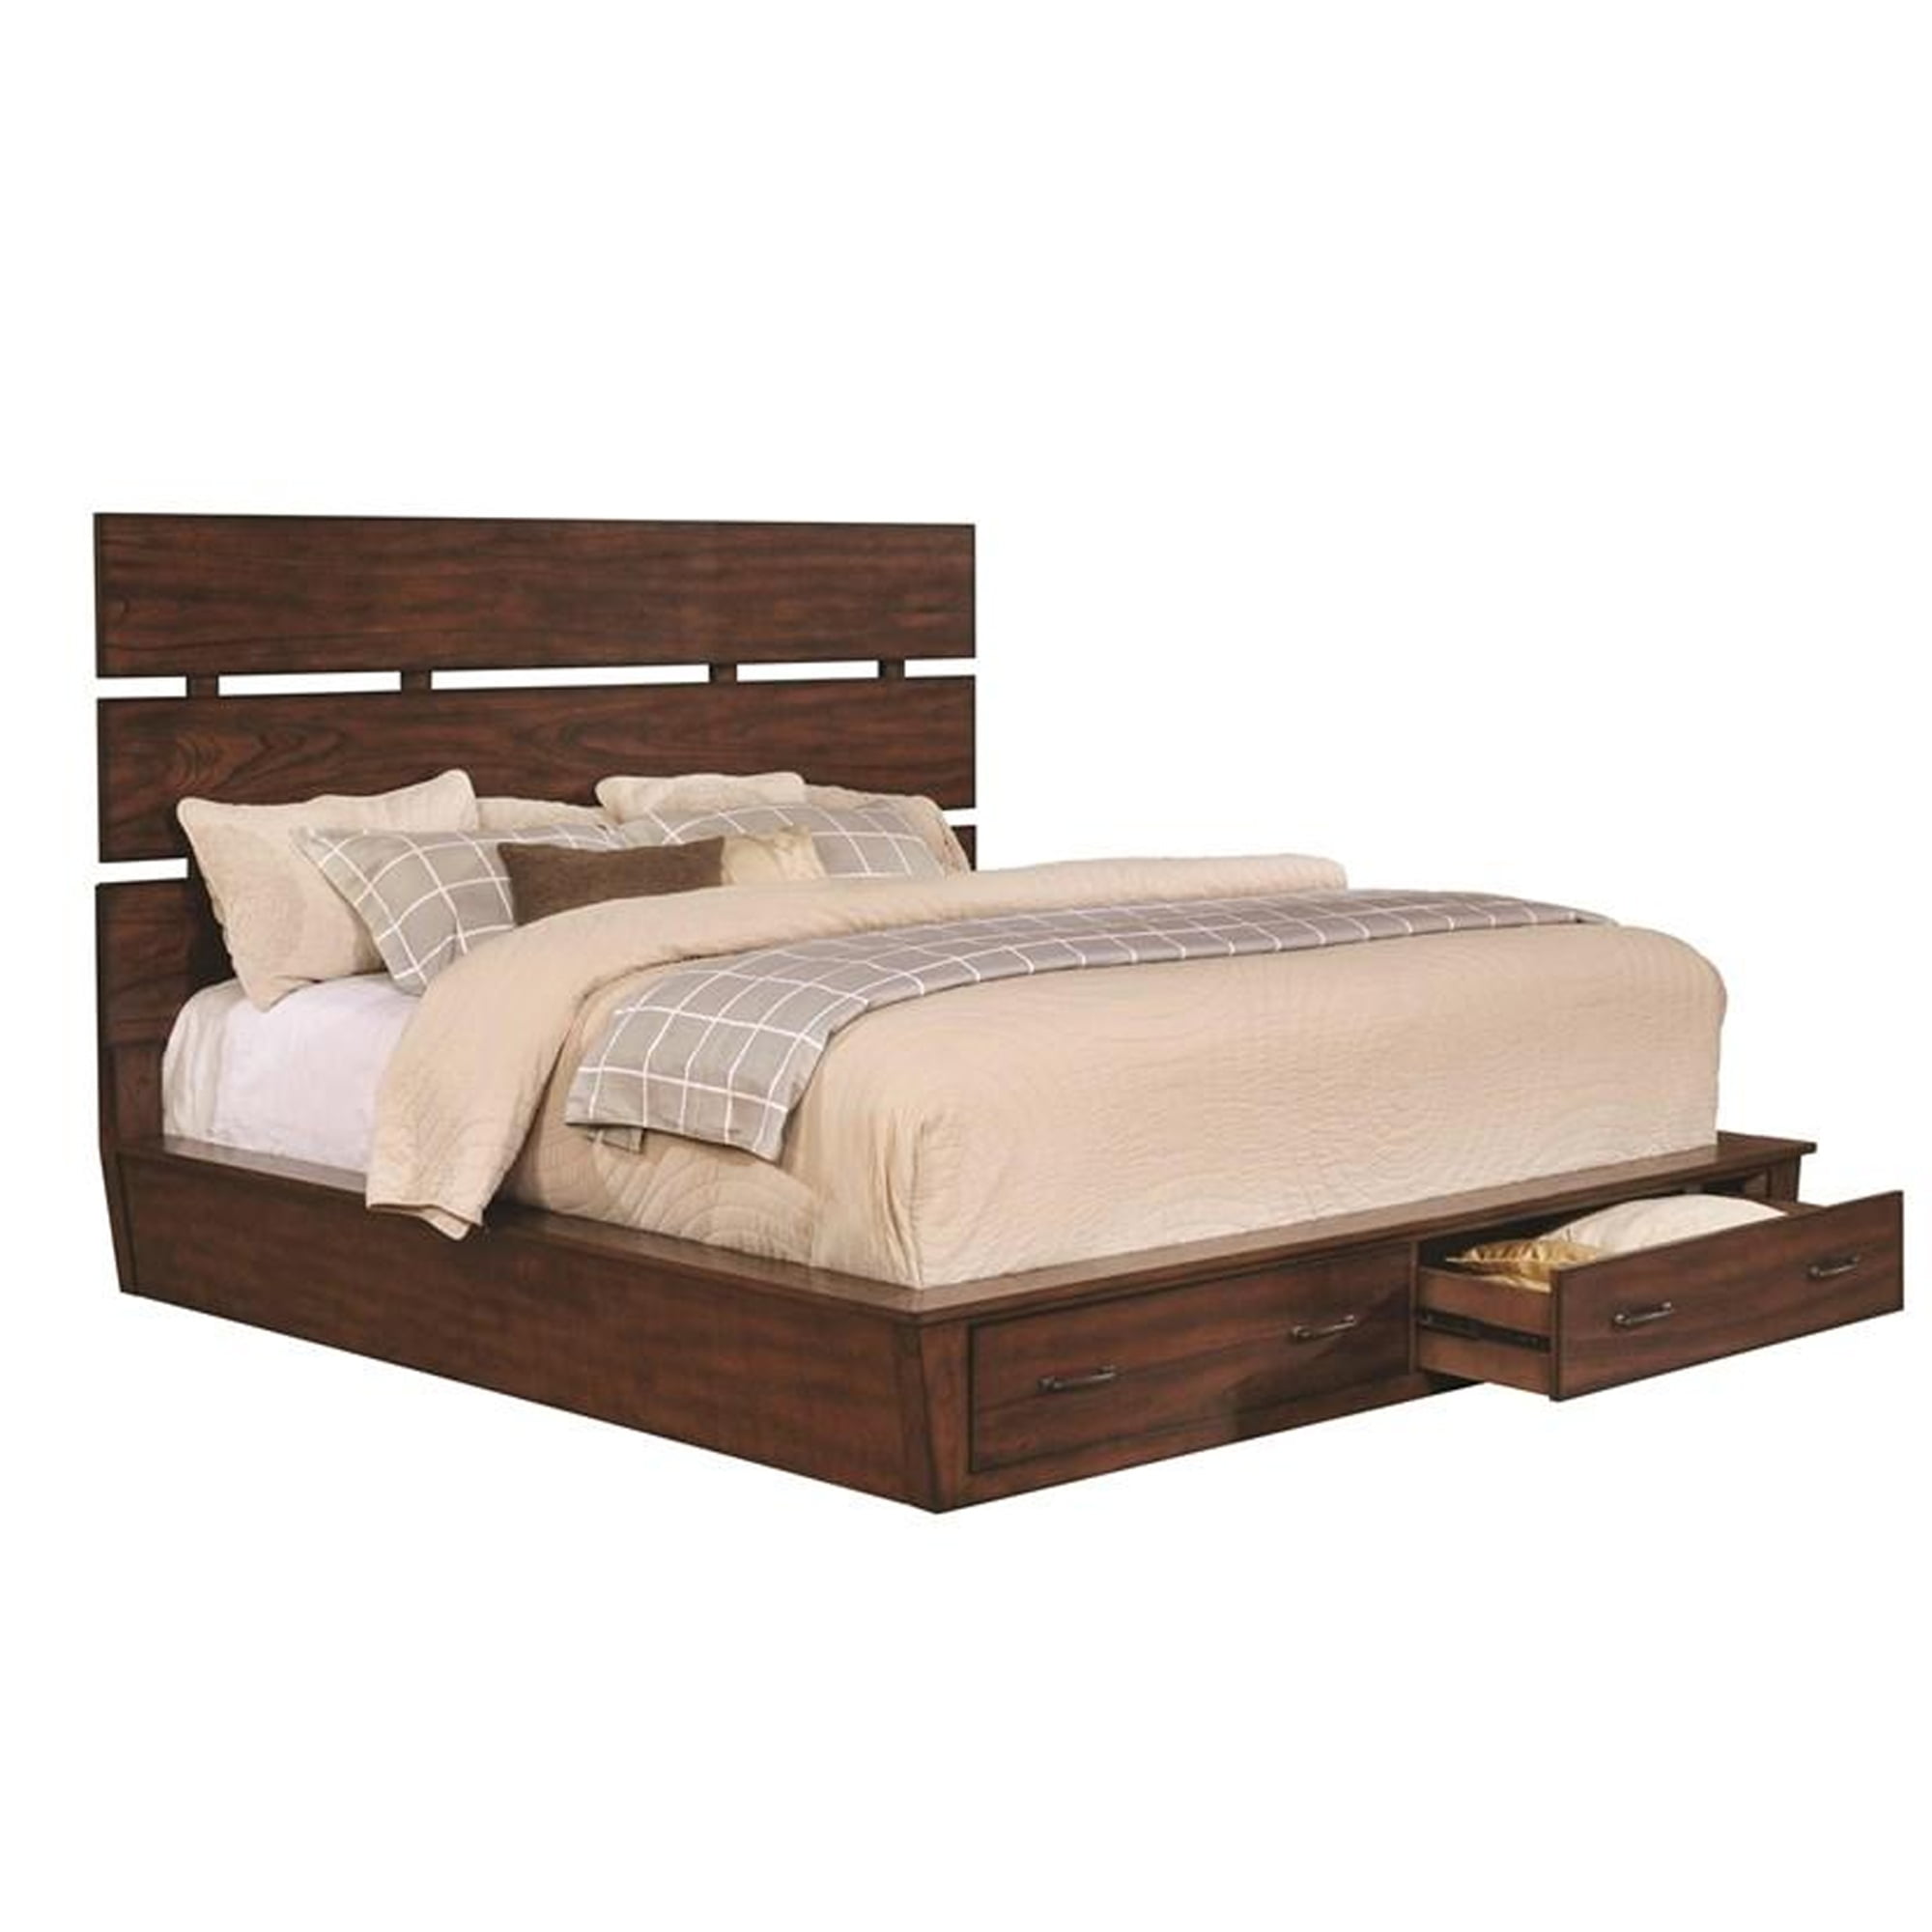 Wooden Queen Size Bed with Slatted Headboard and Two Base Drawers